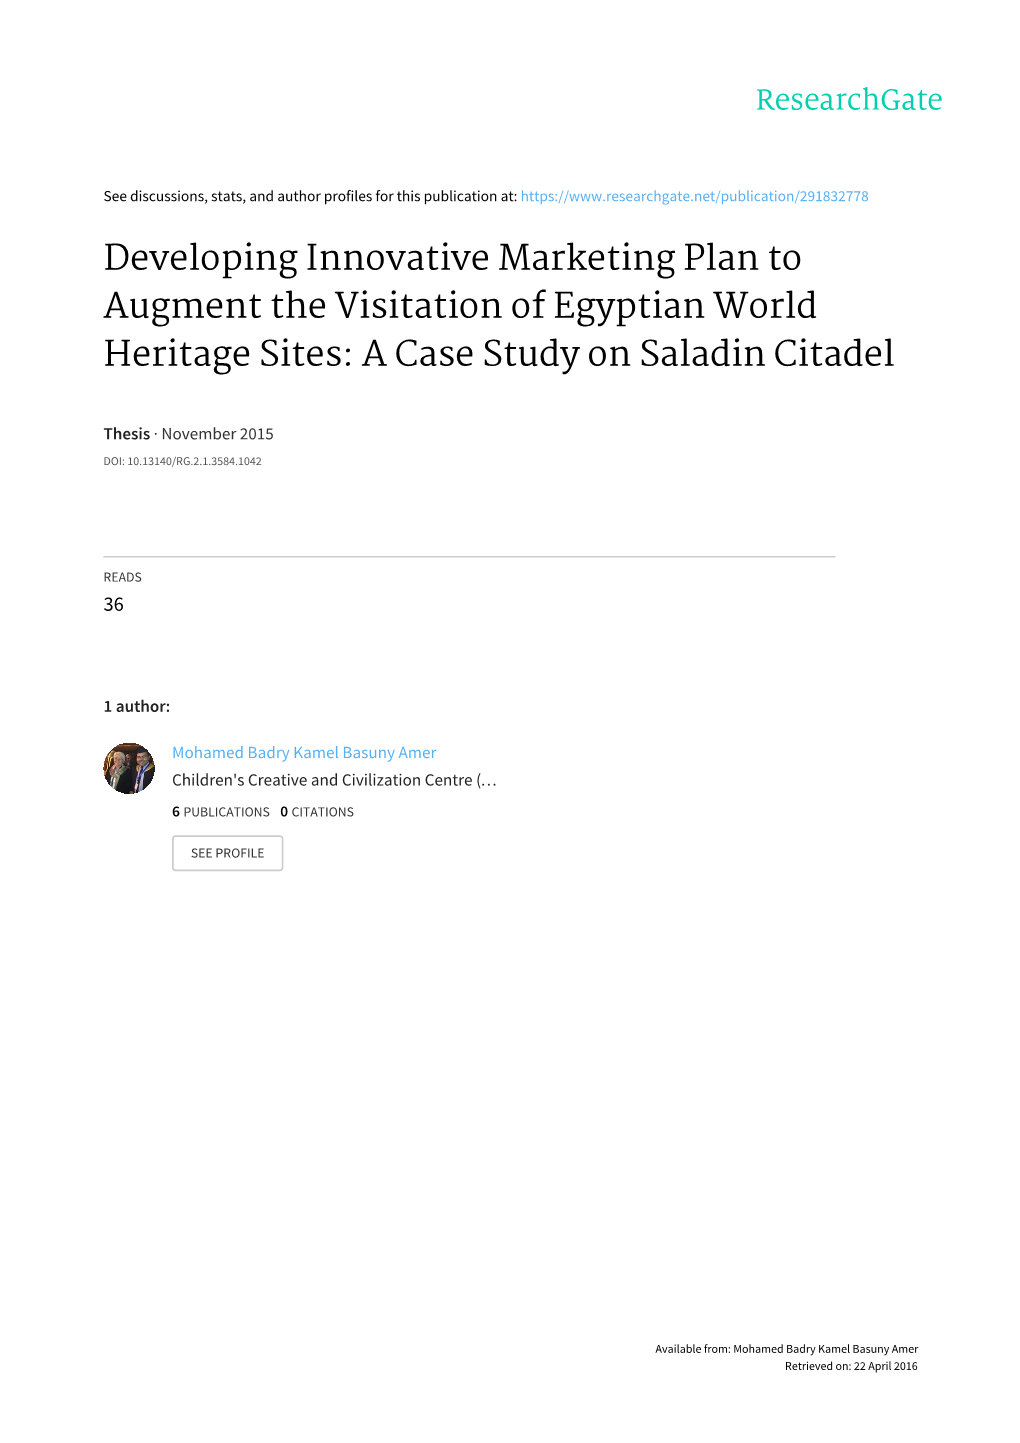 Developing Innovative Marketing Plan to Augment the Visitation of Egyptian World Heritage Sites: a Case Study on Saladin Citadel